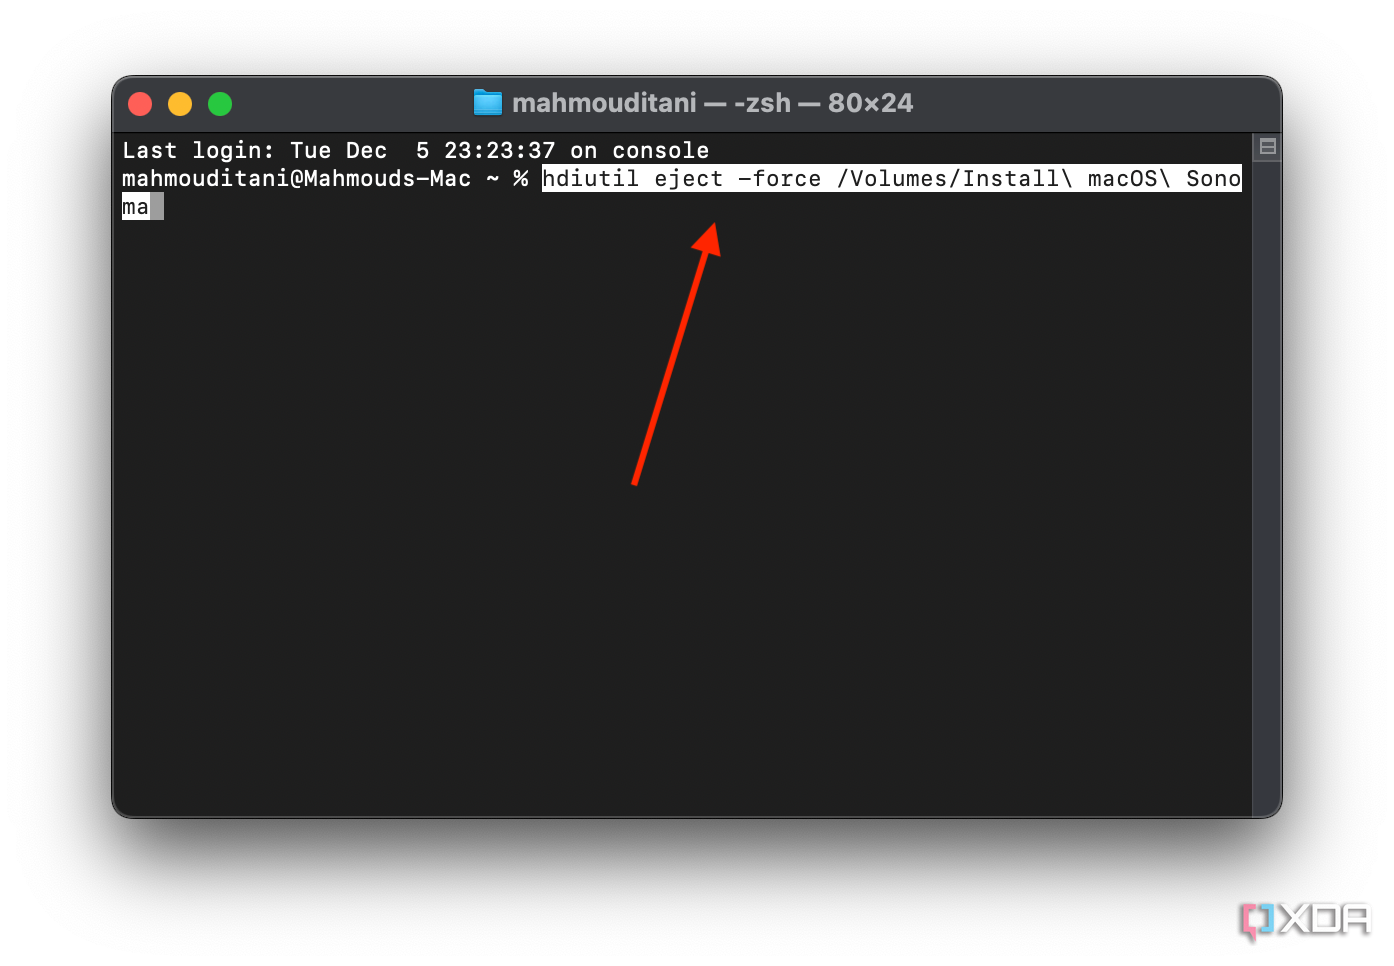 hdiutil eject -force /Volumes/Install\ macOS\ Sonoma command in Terminal on macOS